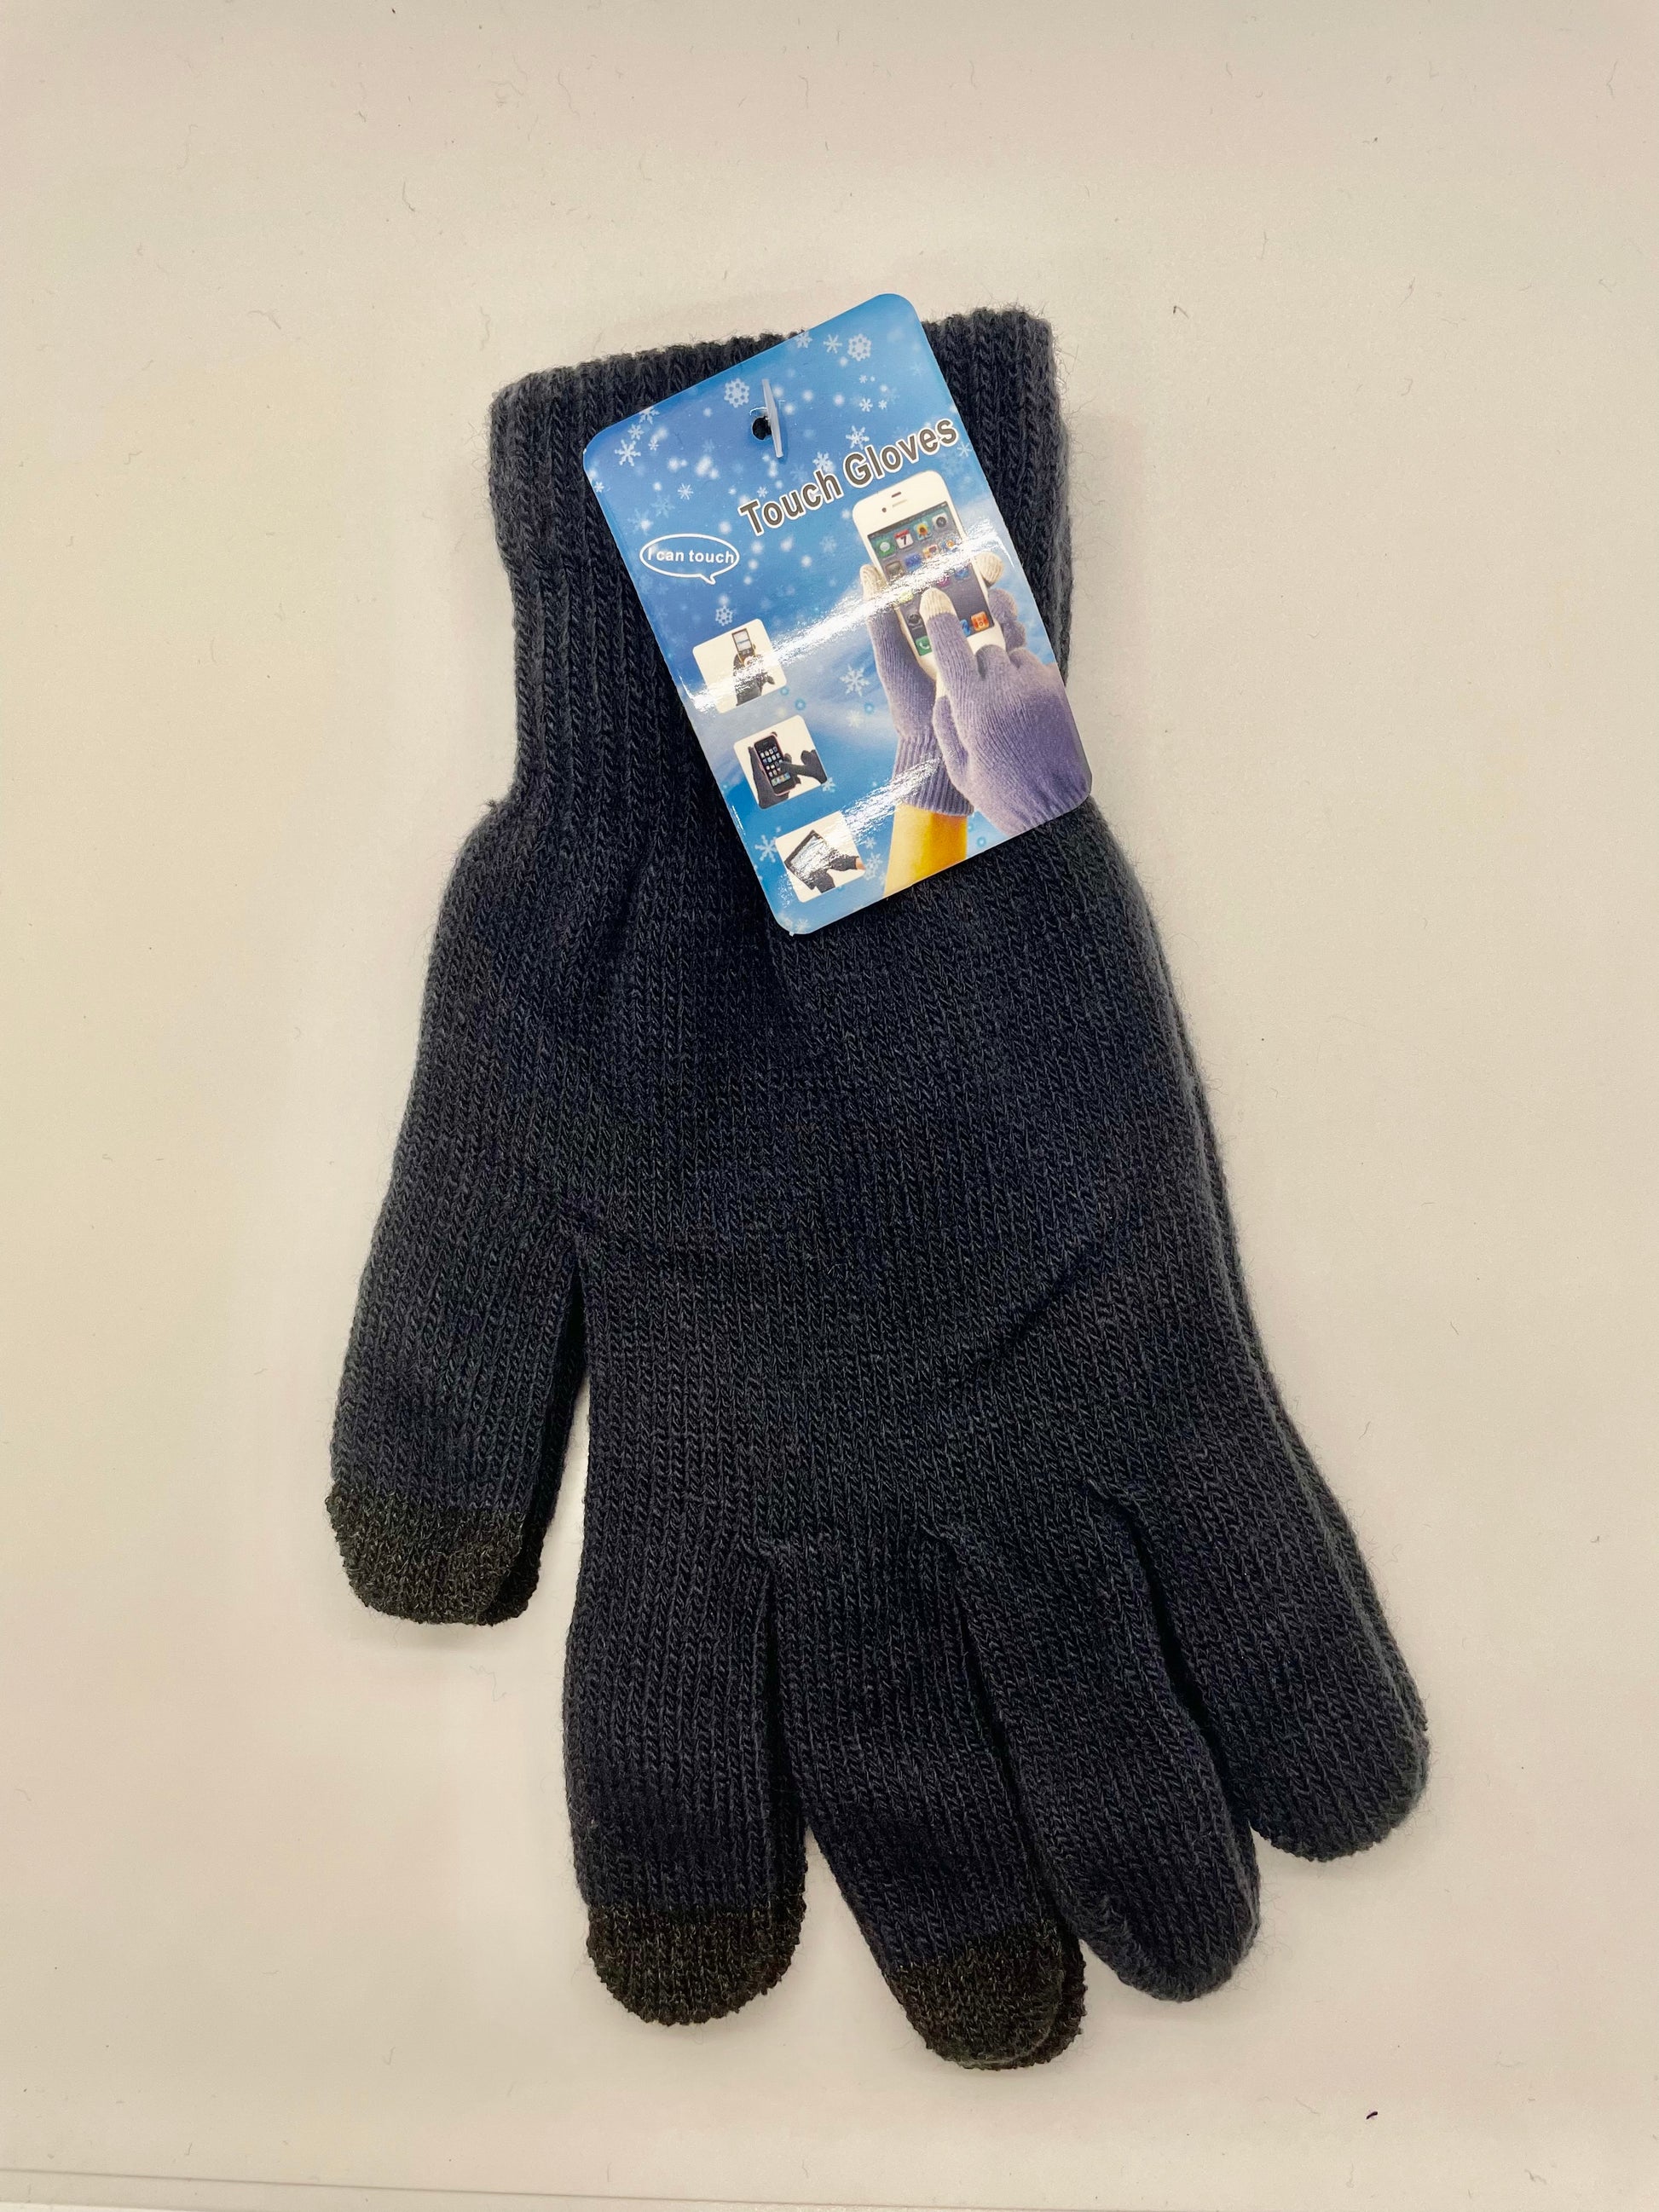 "Black touch screen gloves with a padded footbed and a stretchy fit"